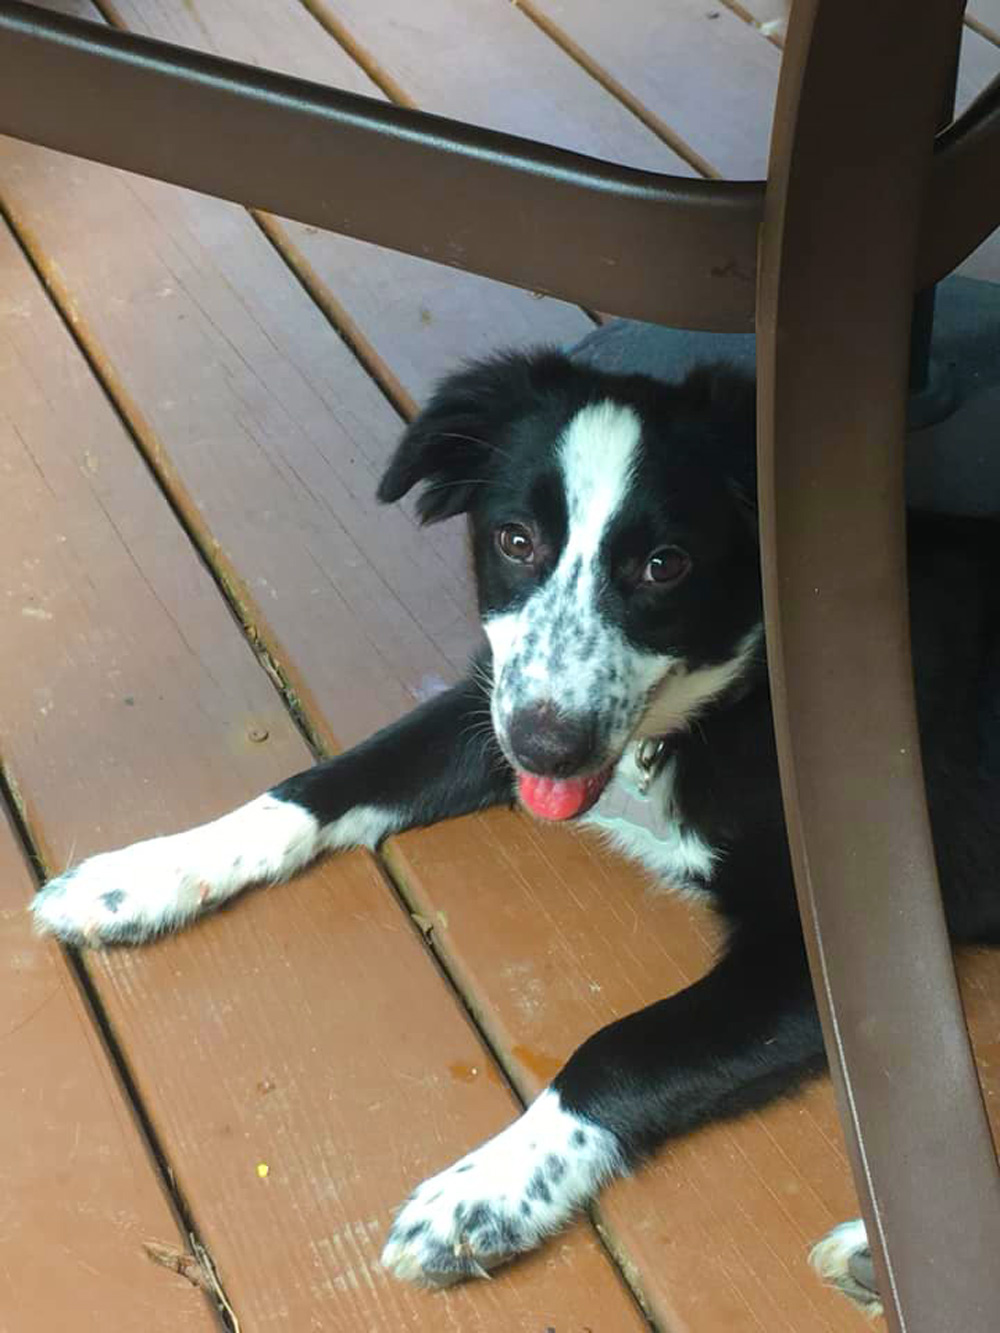 Meet Border Collie Lexi. Jennifer M. and her family in Pittsburgh, PA adopted Lexi this year, and Lexi’s smiling; she’s pretty happy about her new family!